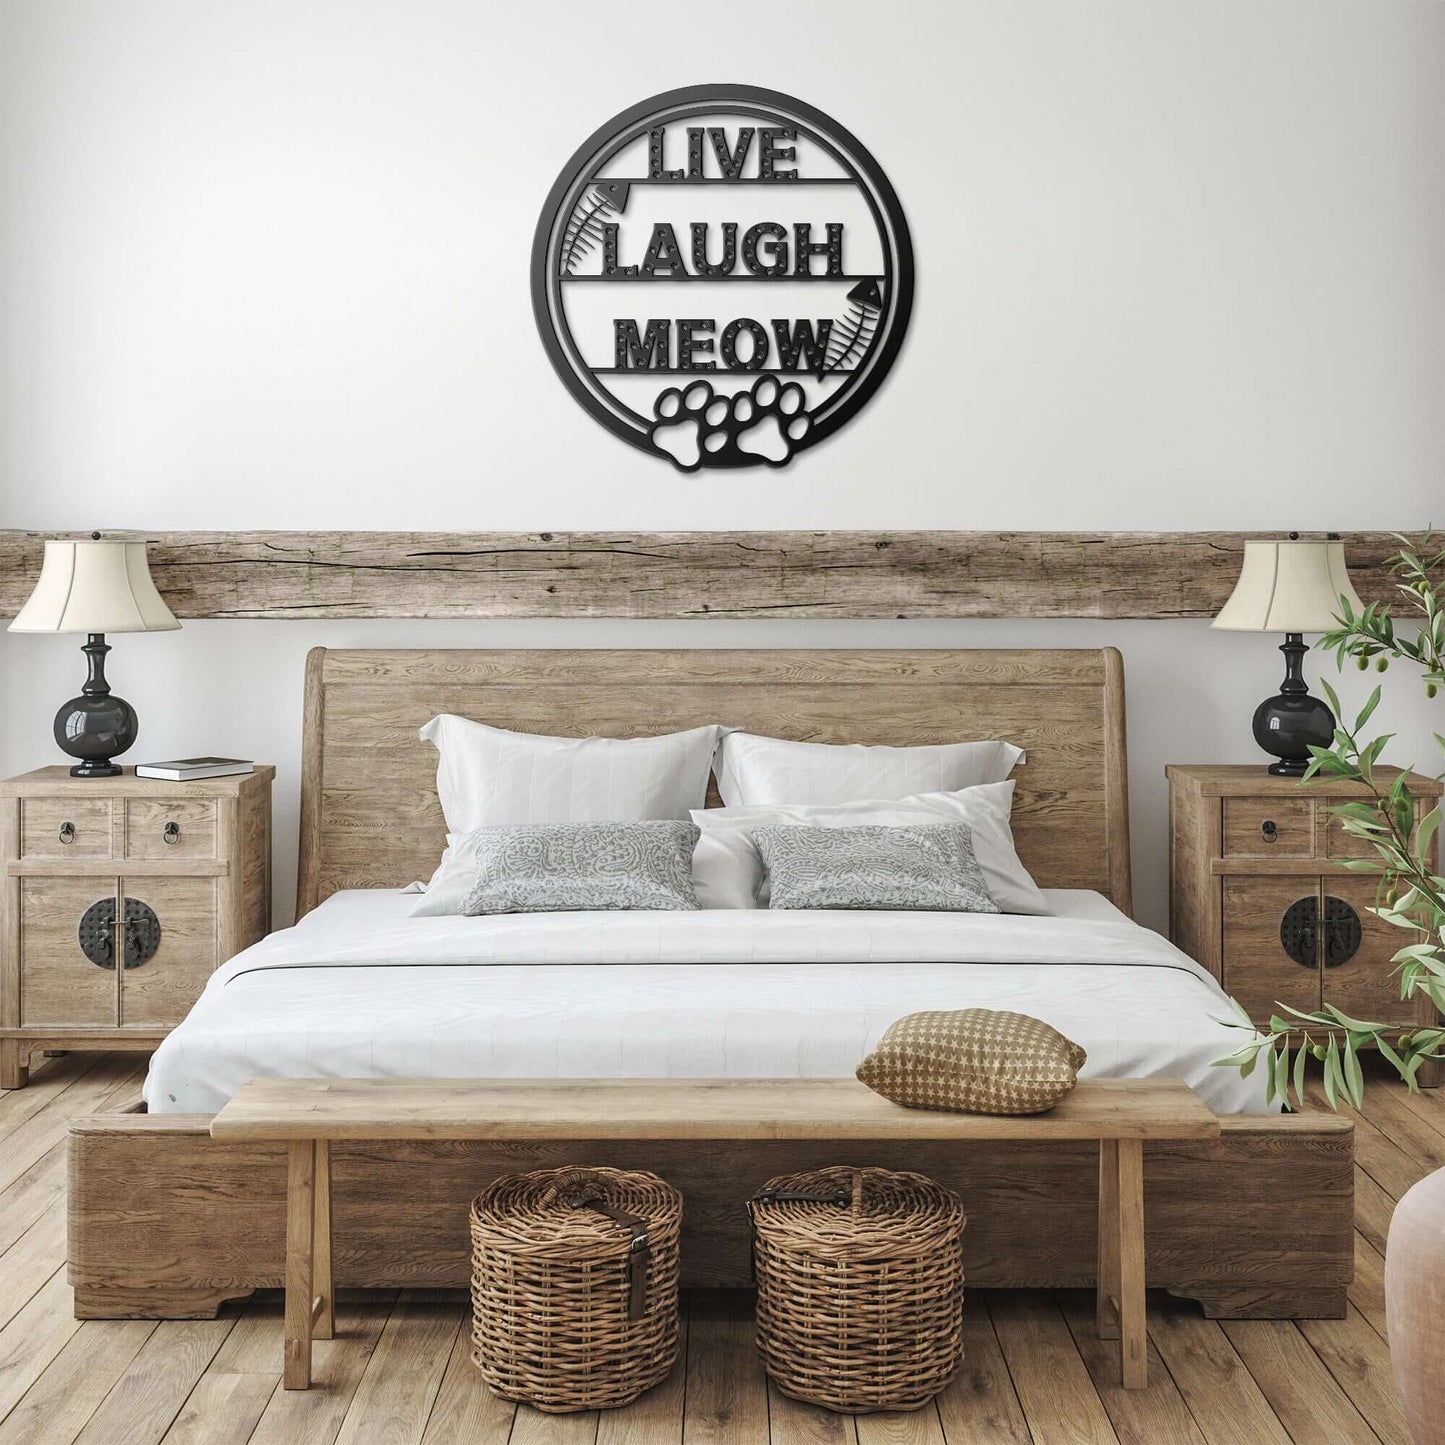 Live Laugh Meow Cat Metal Wall Art Sign, Cat Metal Sign, Cat Lover, Cat Sign Porch, Metal Cat Wreath, Cat Decor - Always Essential Gifts